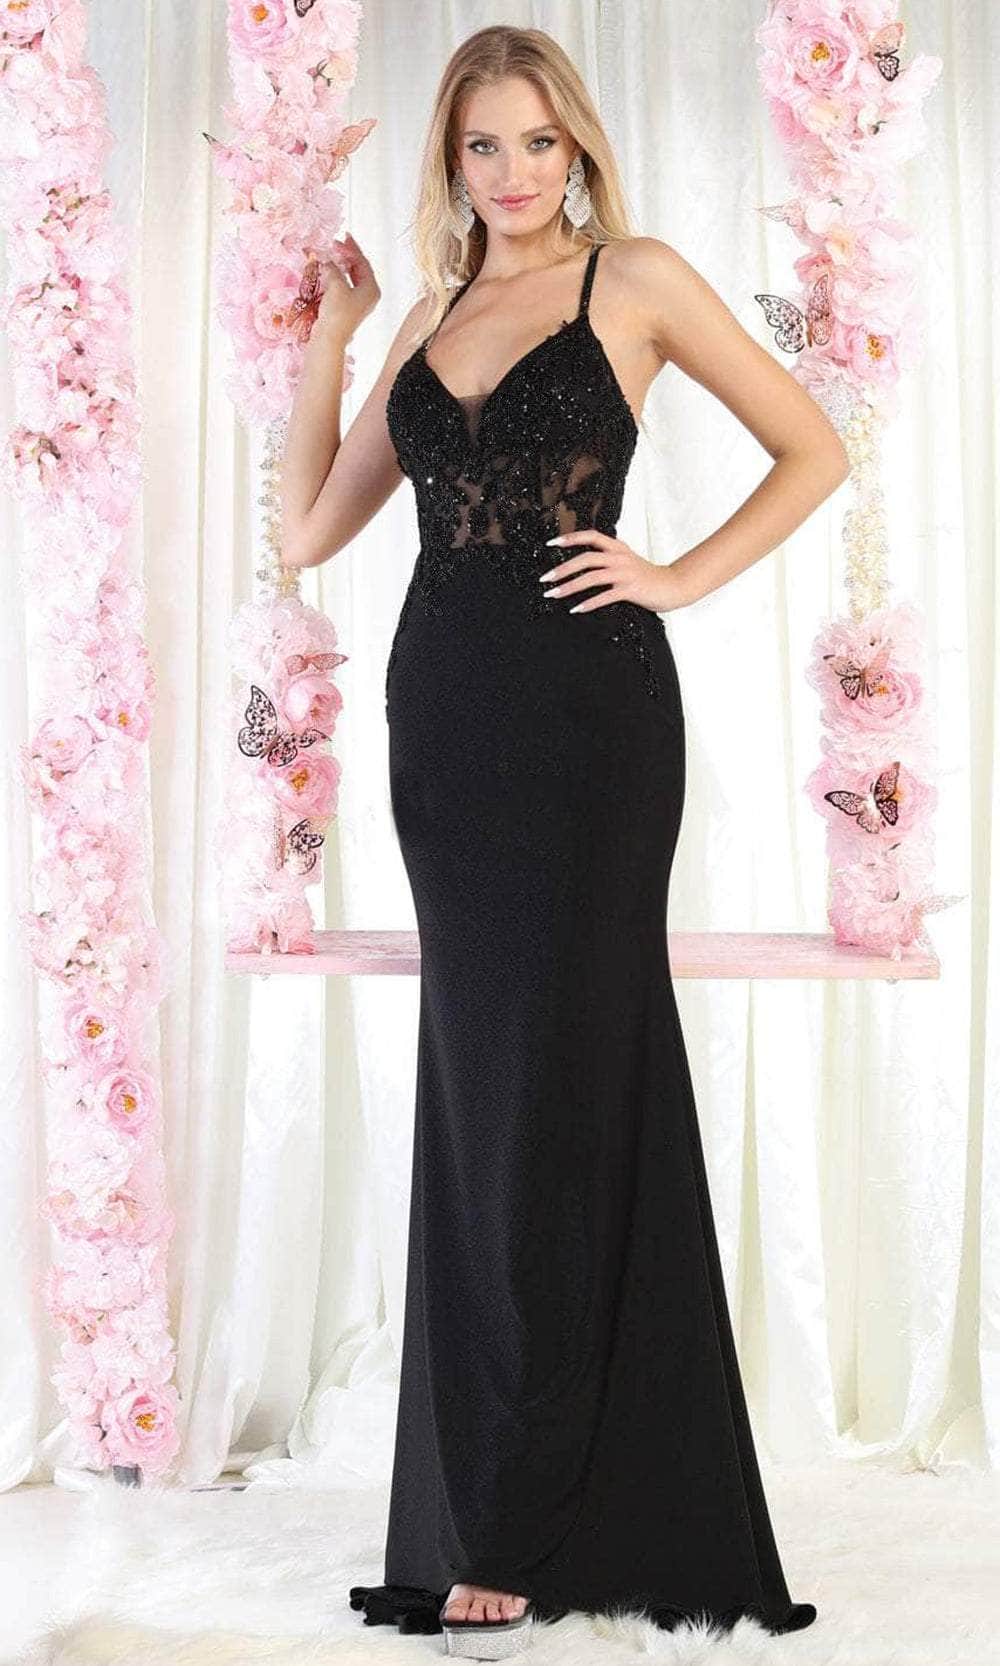 Image of May Queen RQ7991 - Embellished Sleeveless Evening Dress